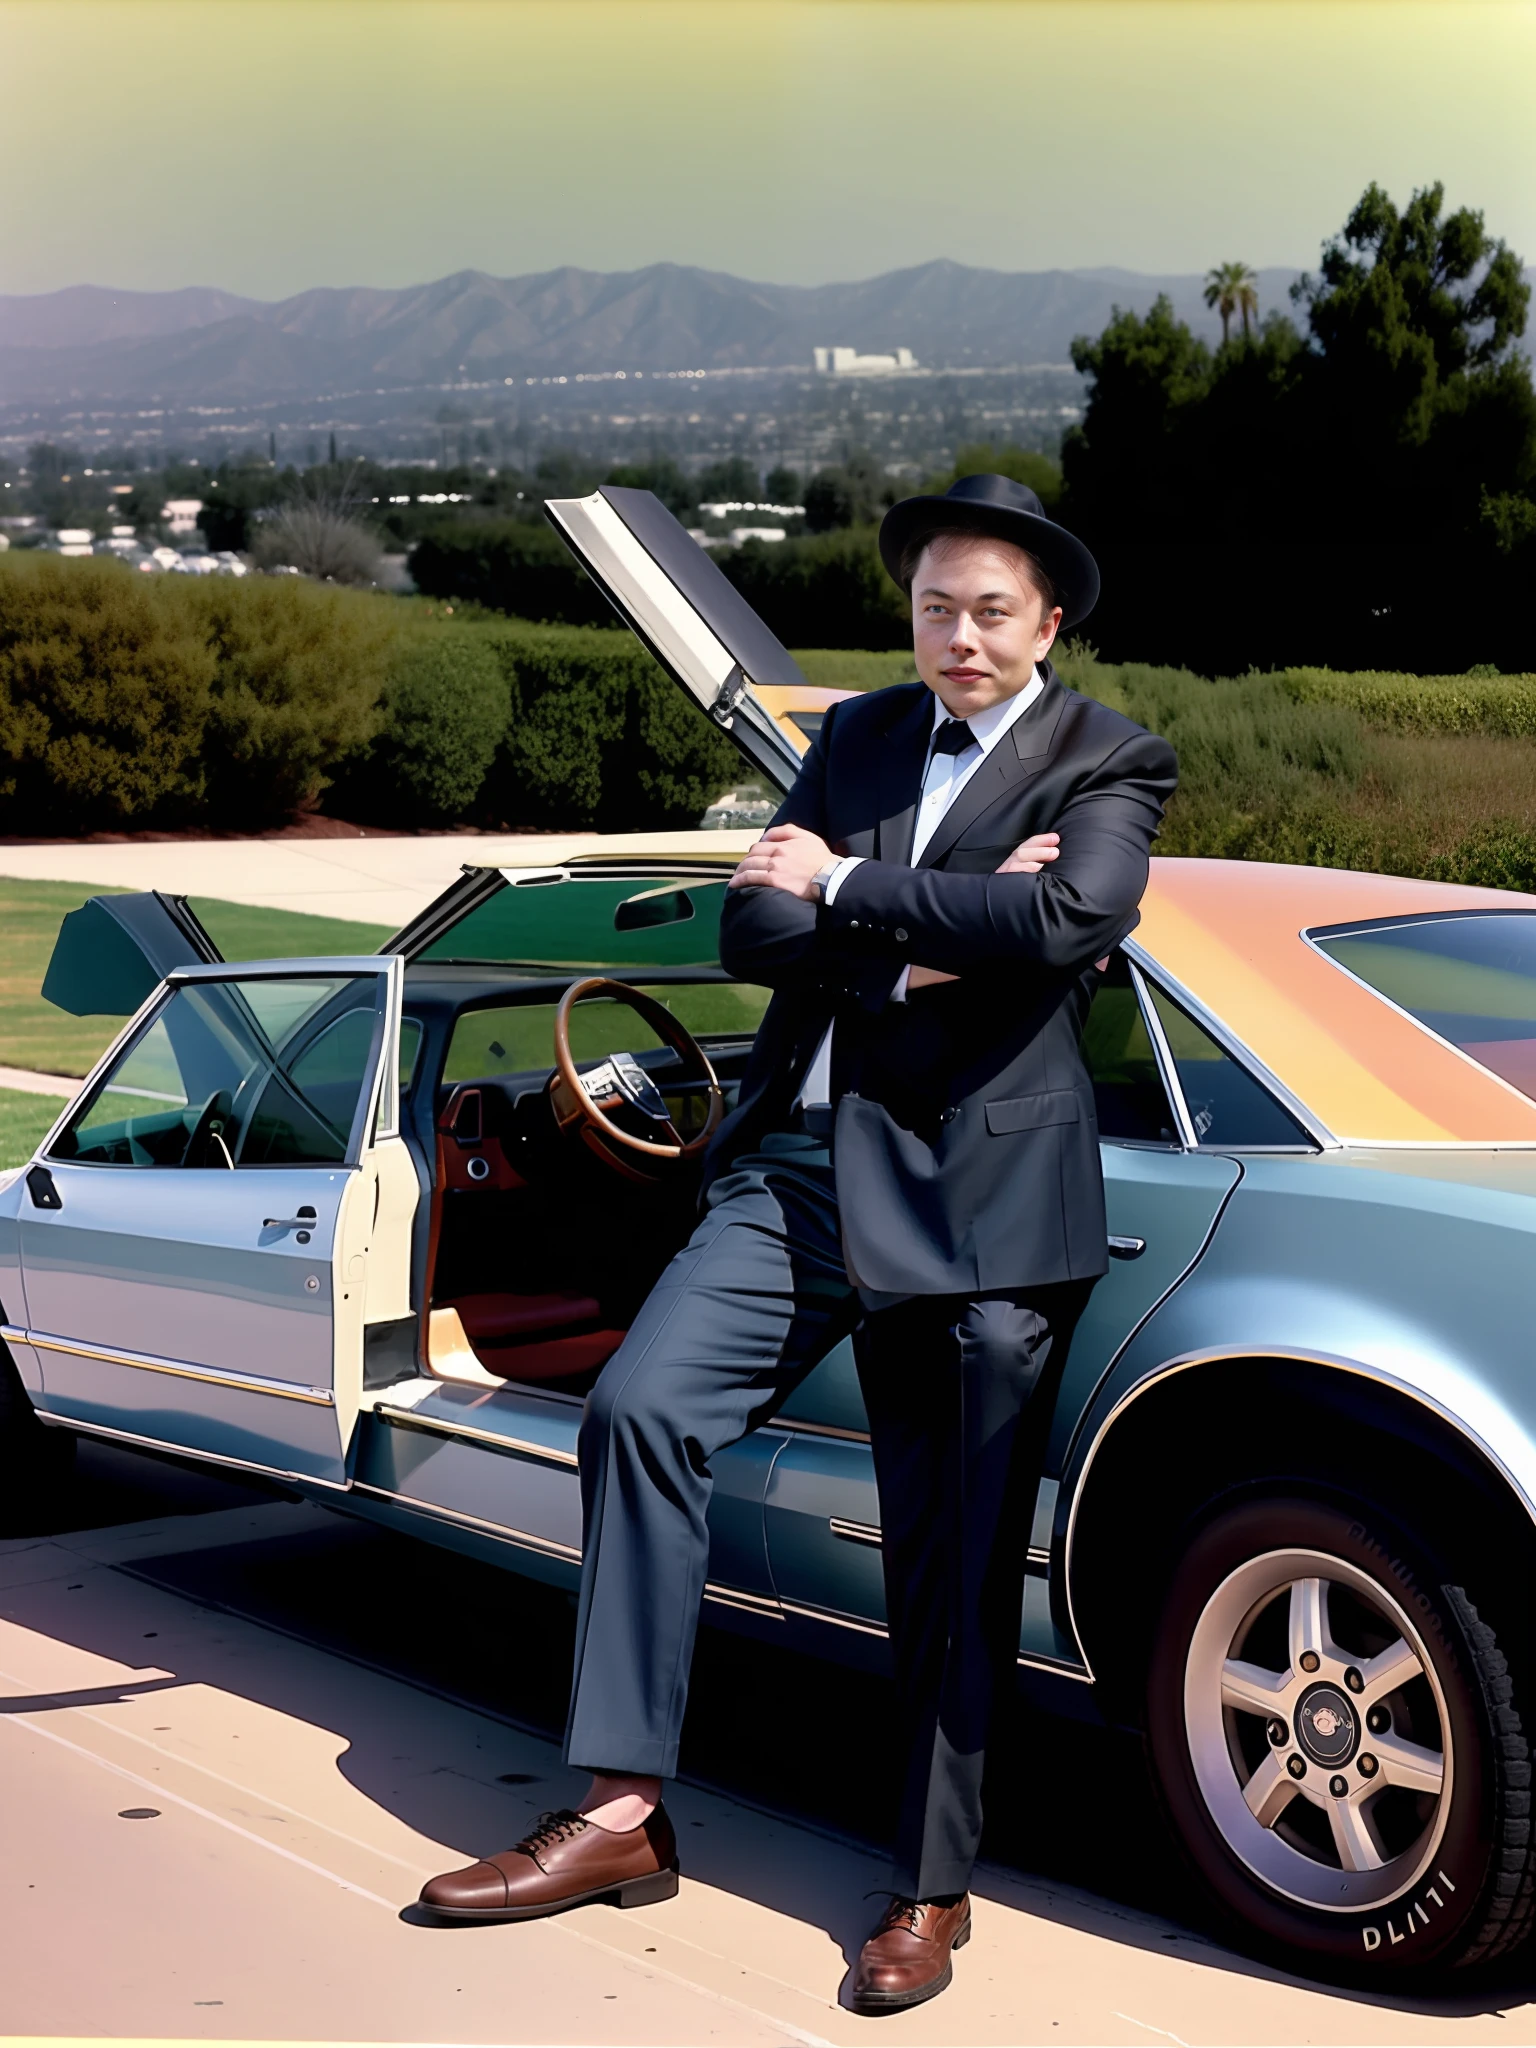 elon musk in the 1970s as pimp in san fernando valley, leaning against his car, wearing a fancy dress with hat, movie shot